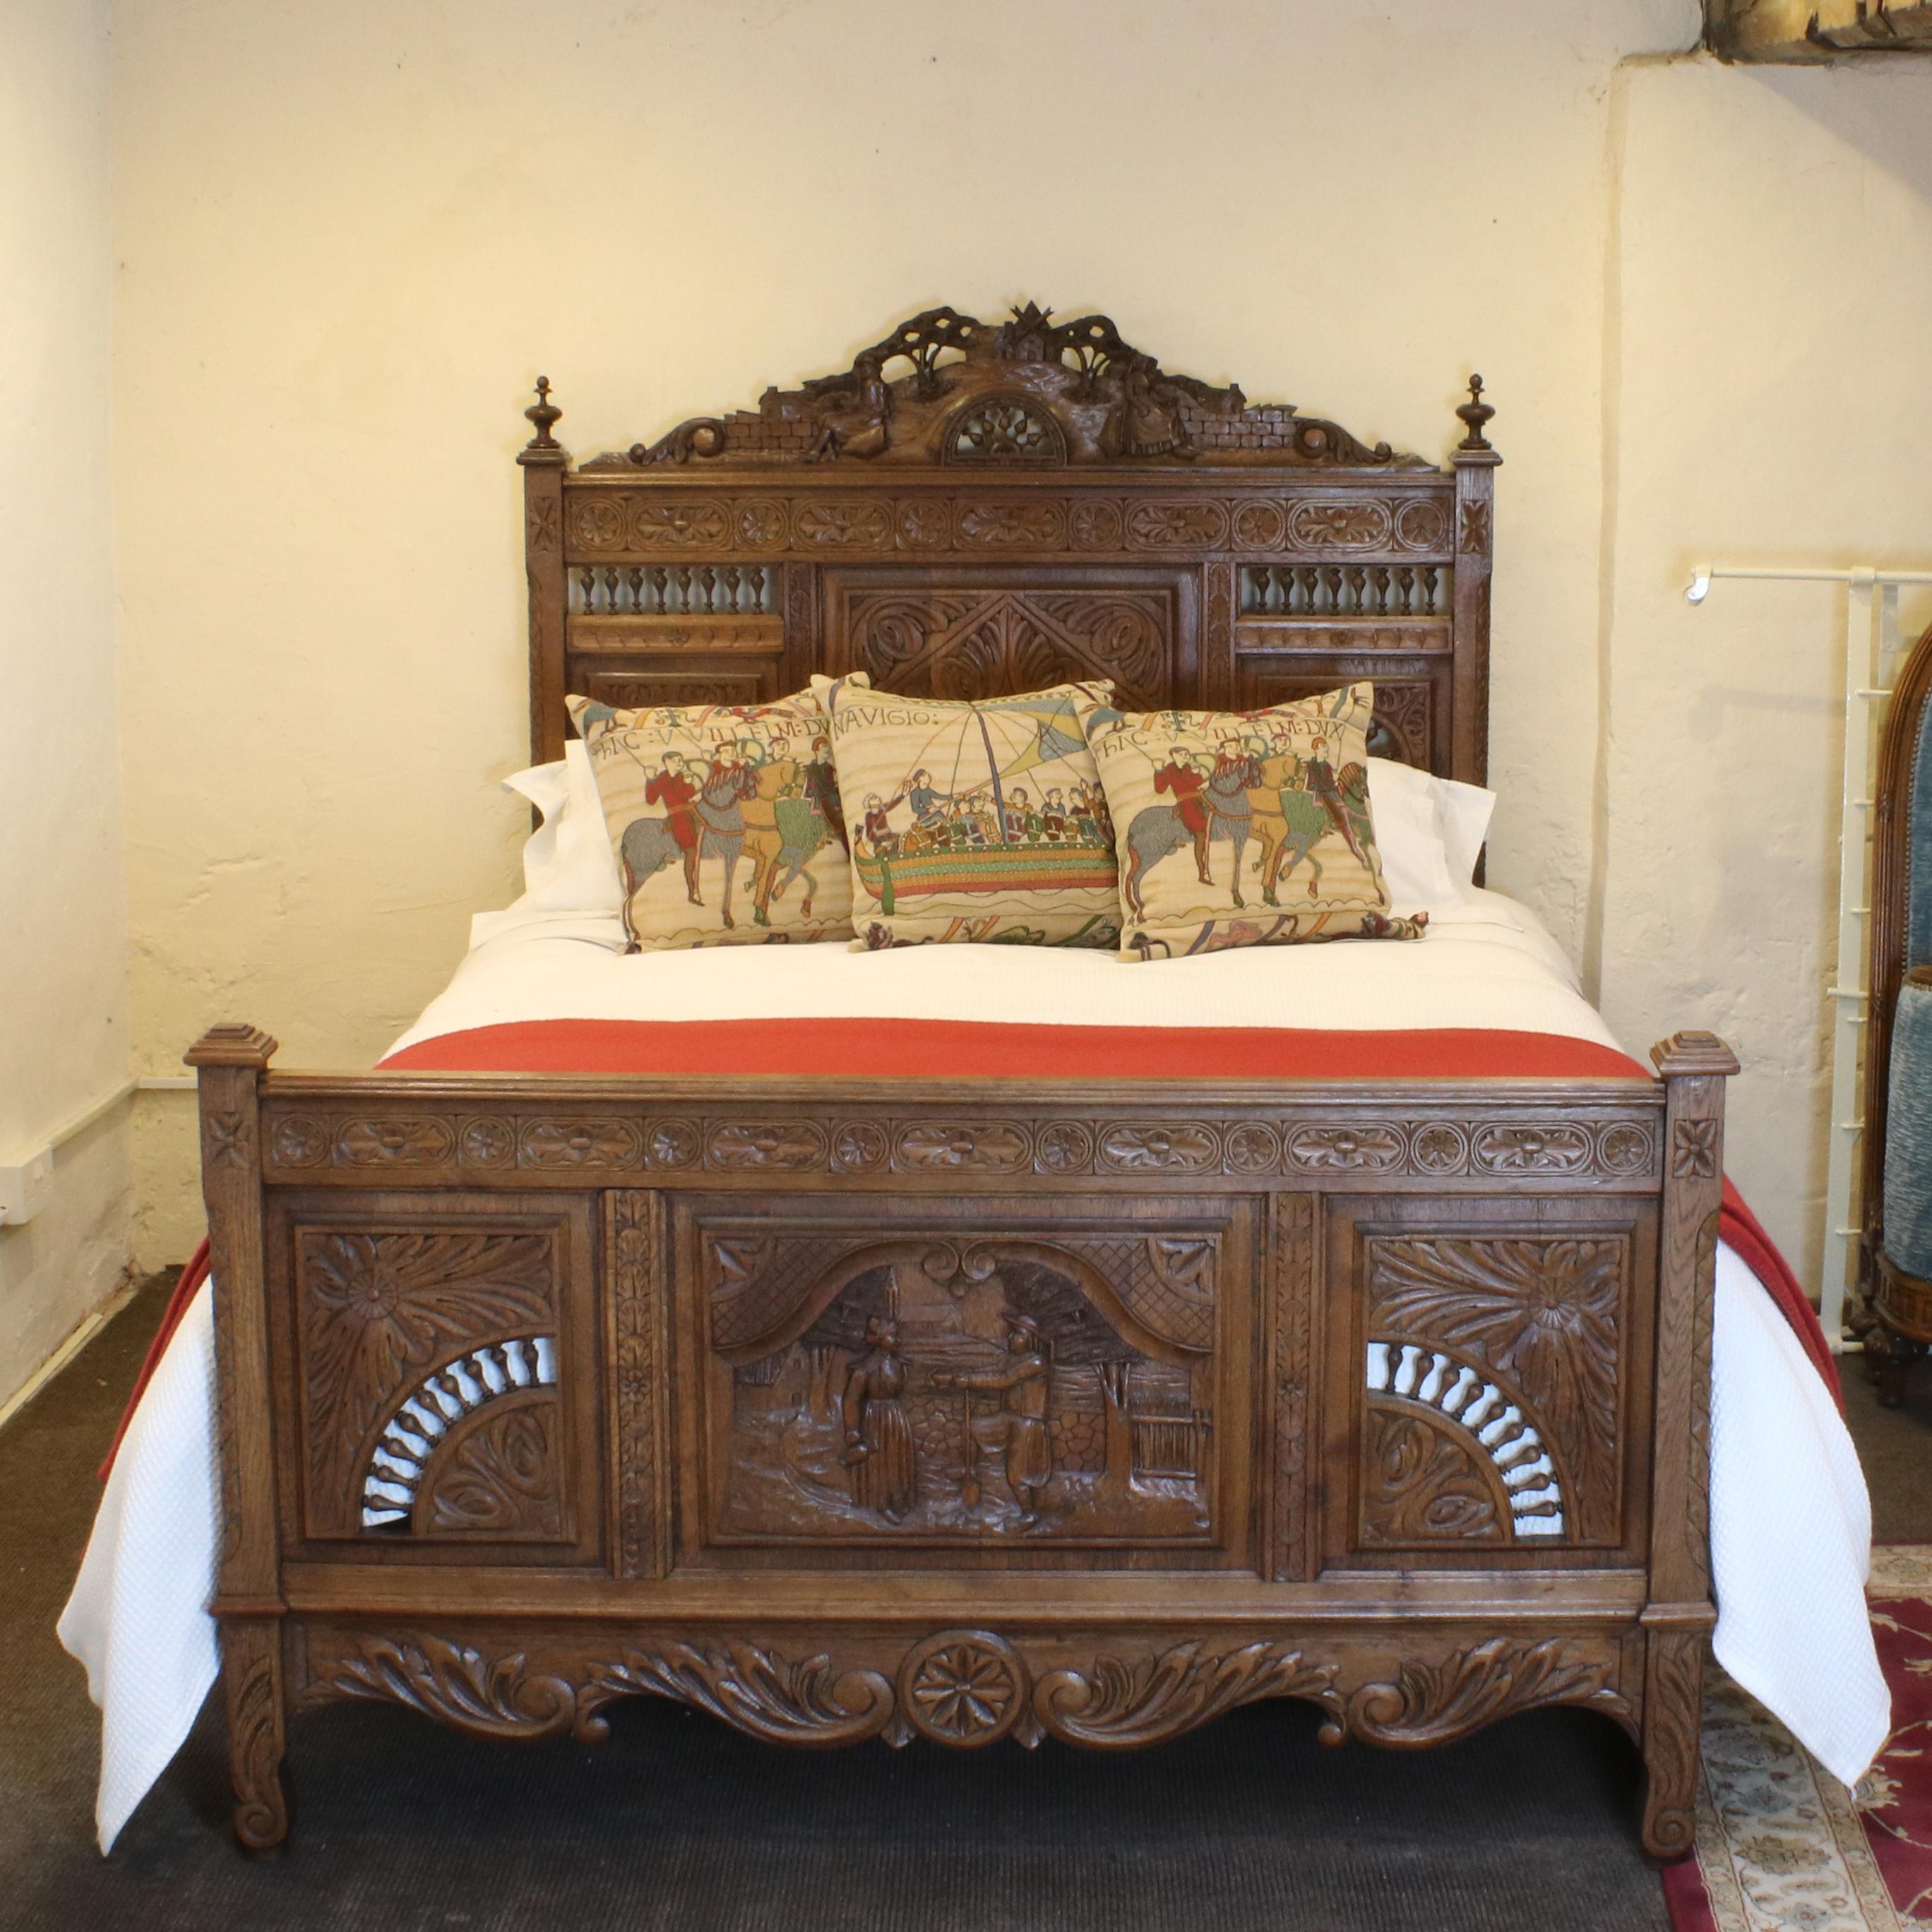 Superbly carved oak Breton bed depicting rustic scenes of peasant figures and typical 